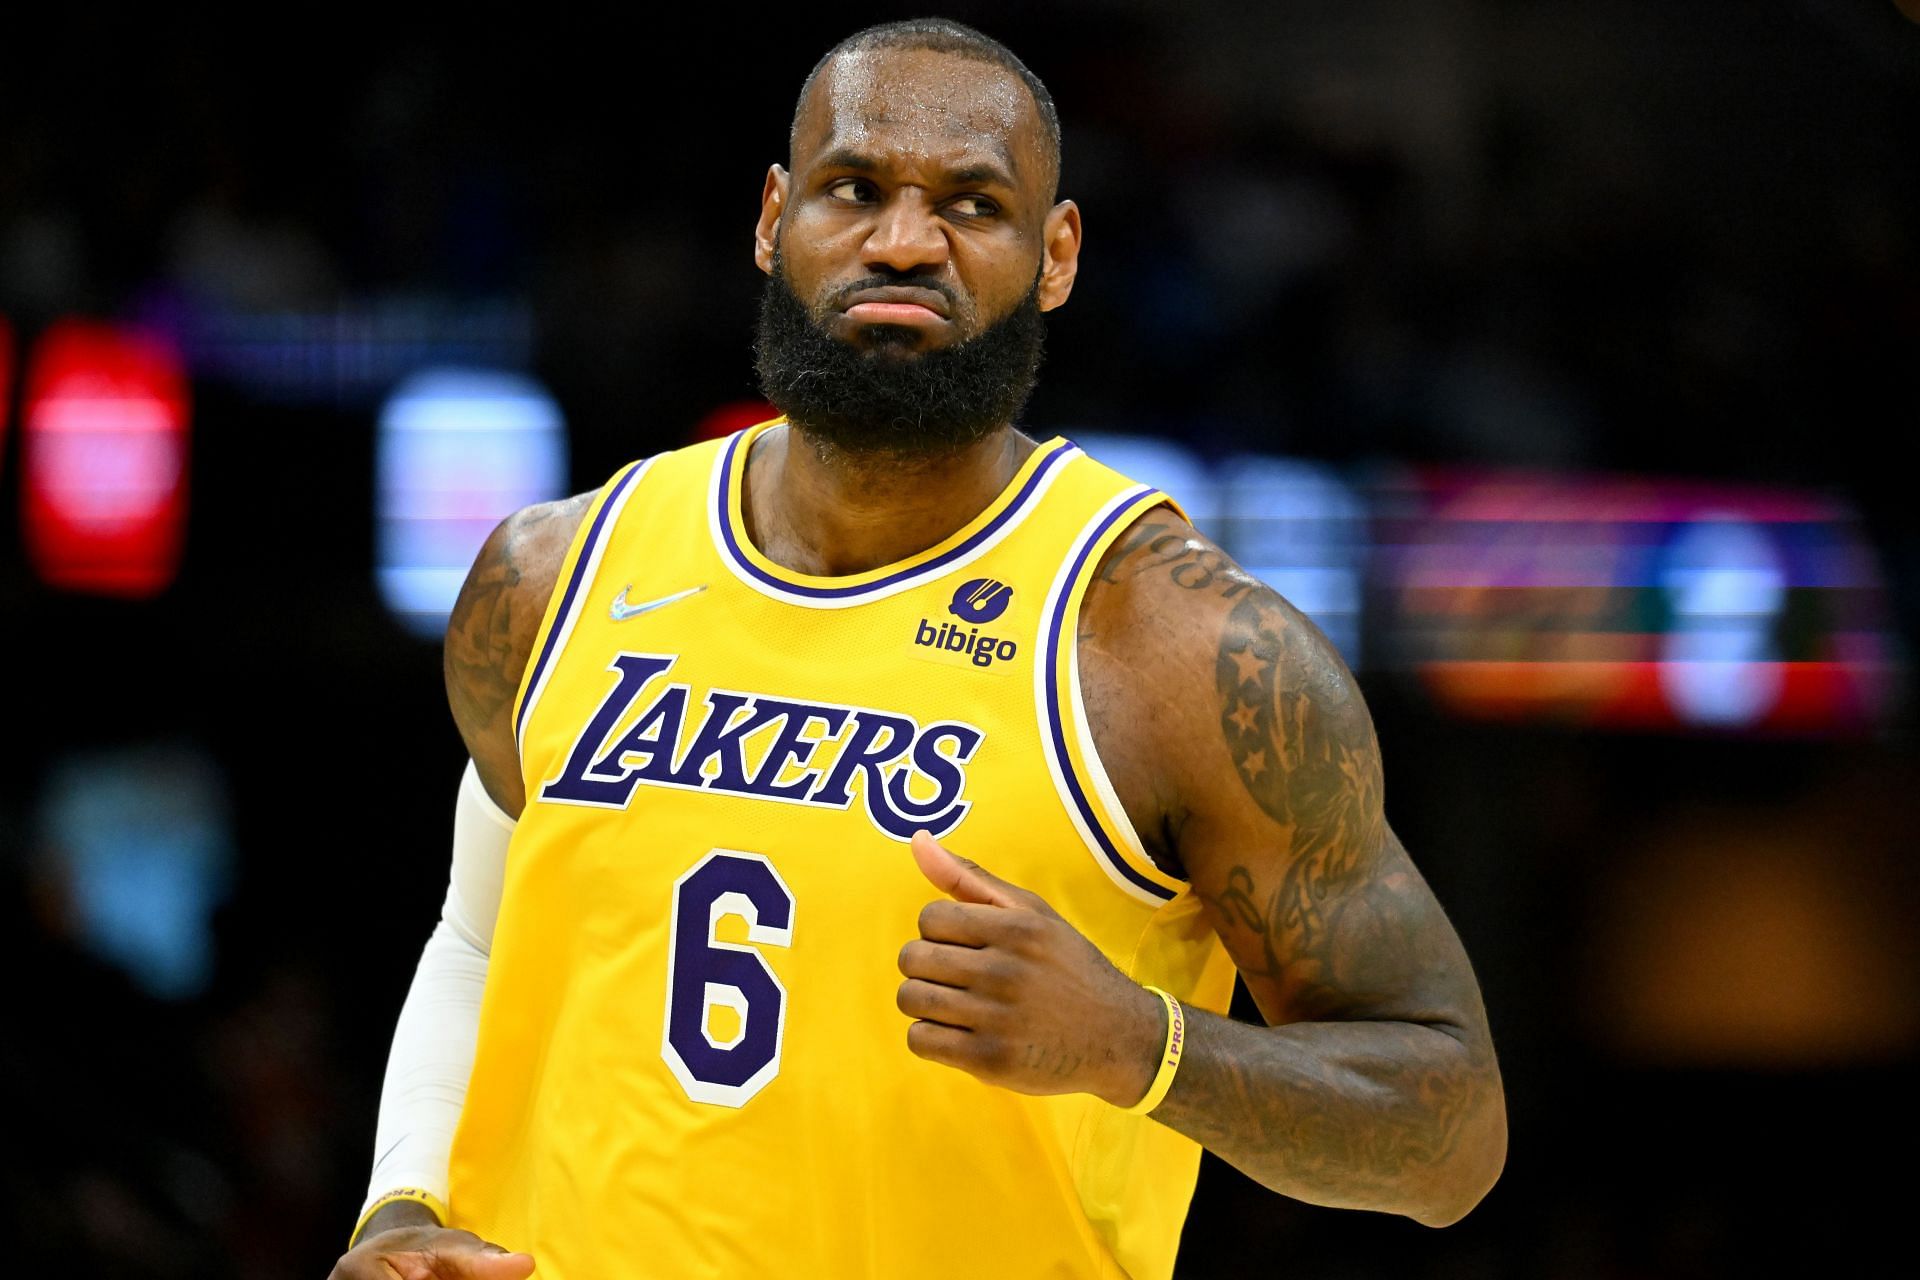 LeBron James and the Los Angeles Lakers are eager to go back to the NBA Finals.